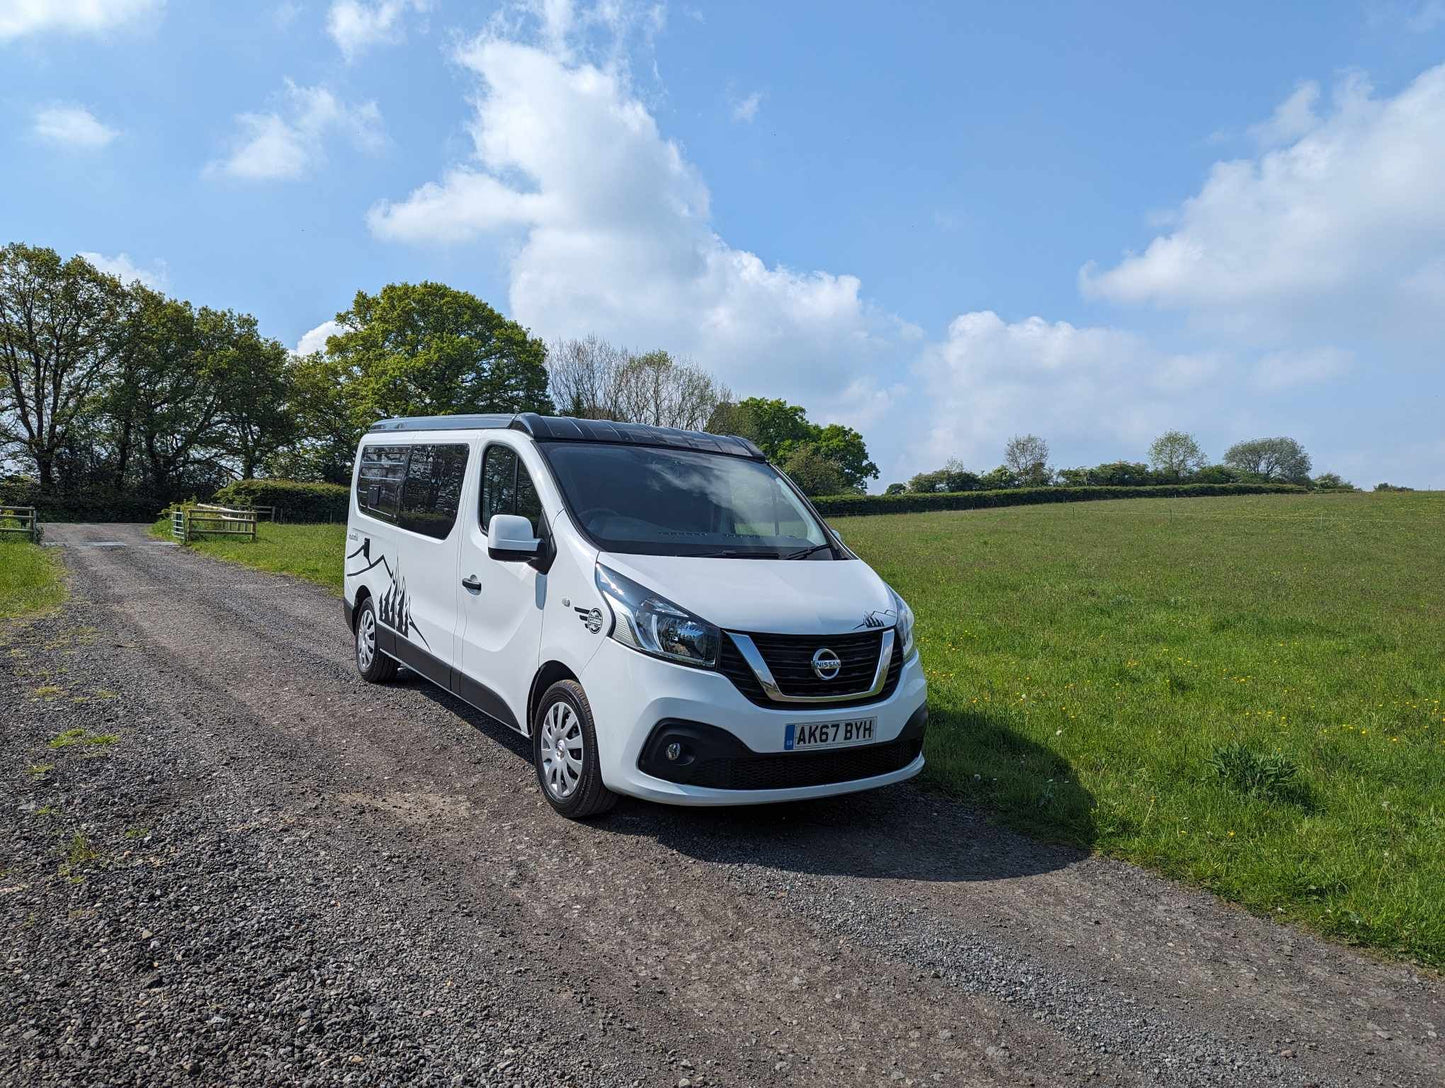 Pre Loved CCCampers 'Mamble' Nissan NV300 Campervan with only 24,000 miles on the clock!